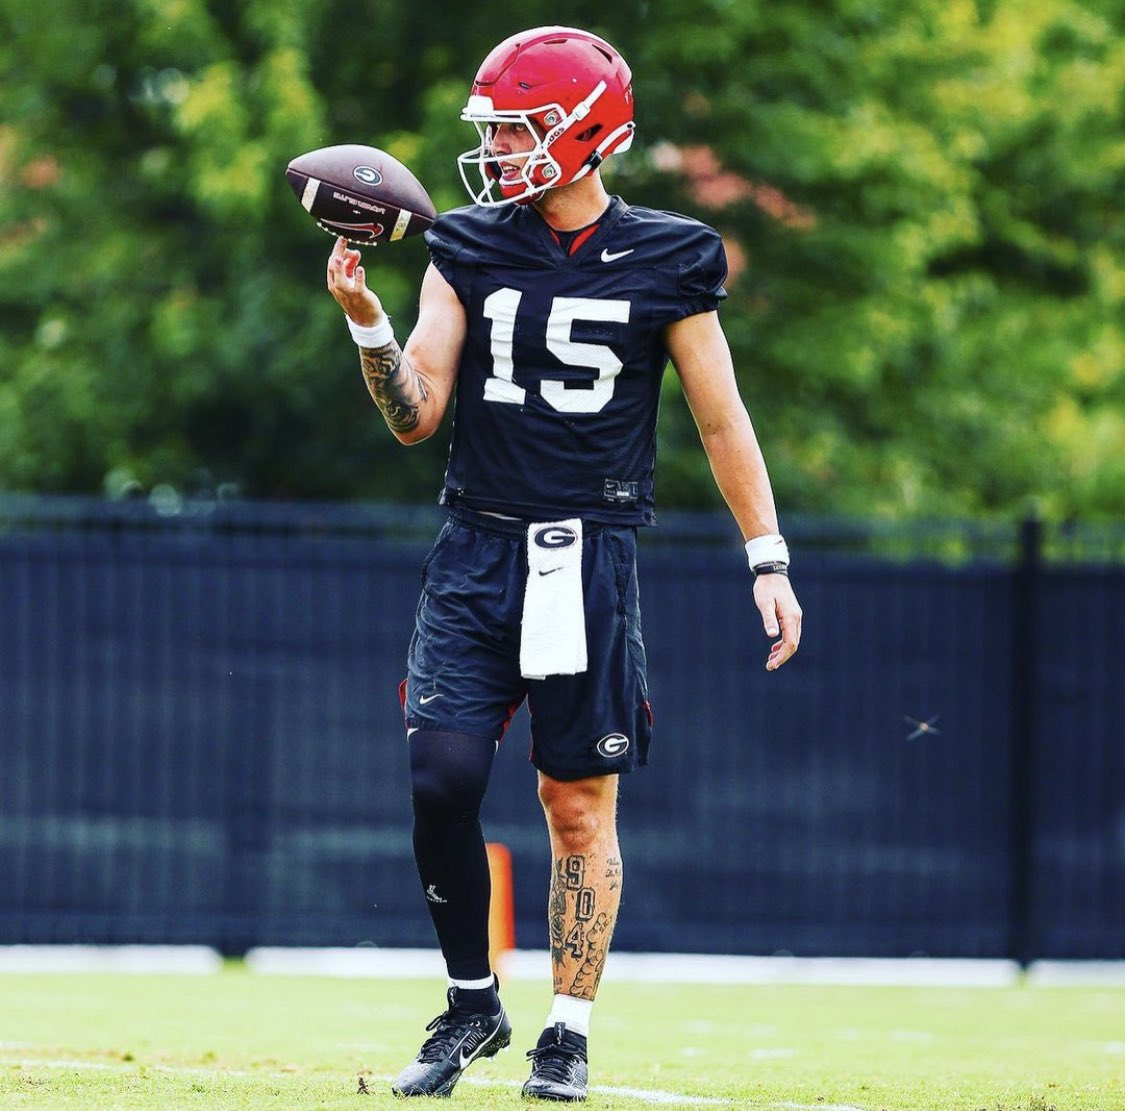 UGA is going from a QB who packed lips on the sideline to a QB with a tattoo repping the 904 area code on his shin. The levels of Georgianess are off the charts. They may never lose